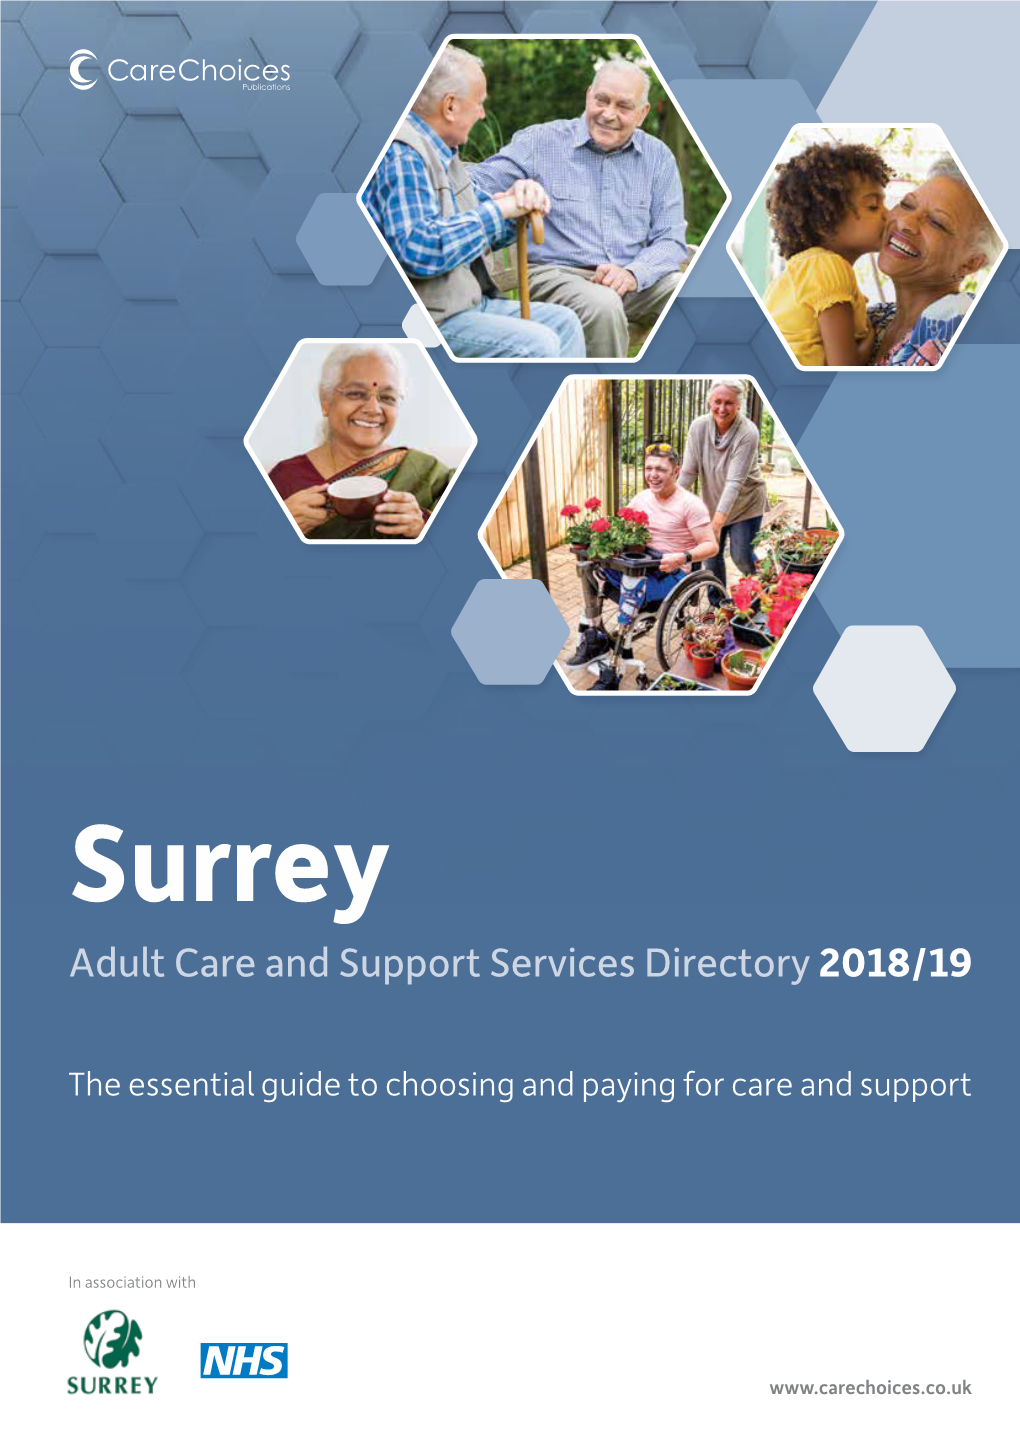 Adult Care and Support Services Directory 2018/19